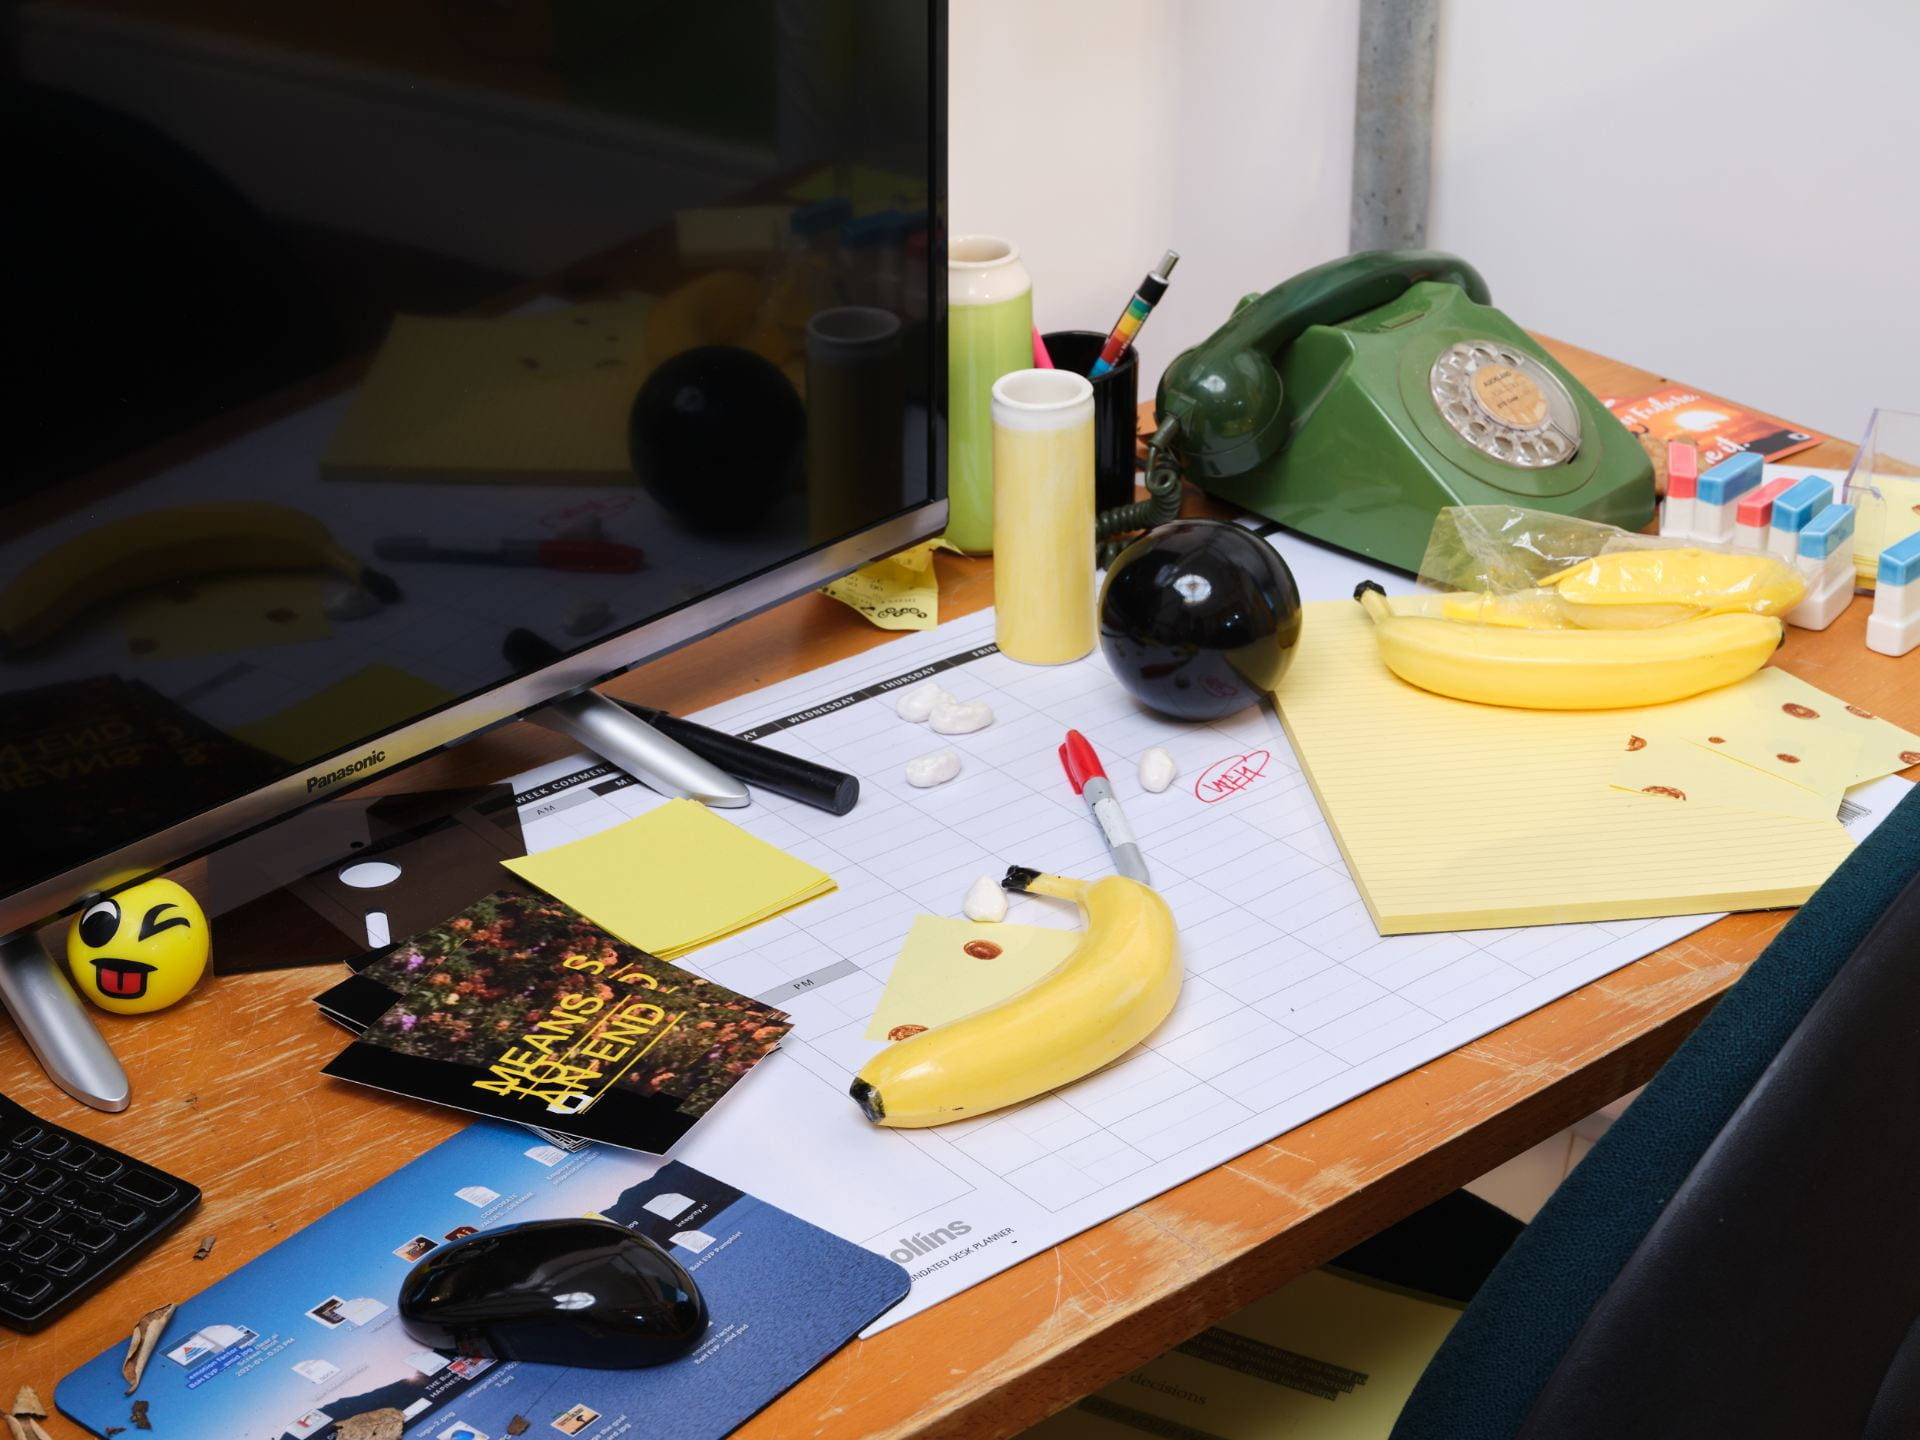 A cluttered office desk. All of the items on the desk - a telephone, a wireless mouse, a banana, a magic 8 ball and pencil cups - have been made out of glazed ceramic.